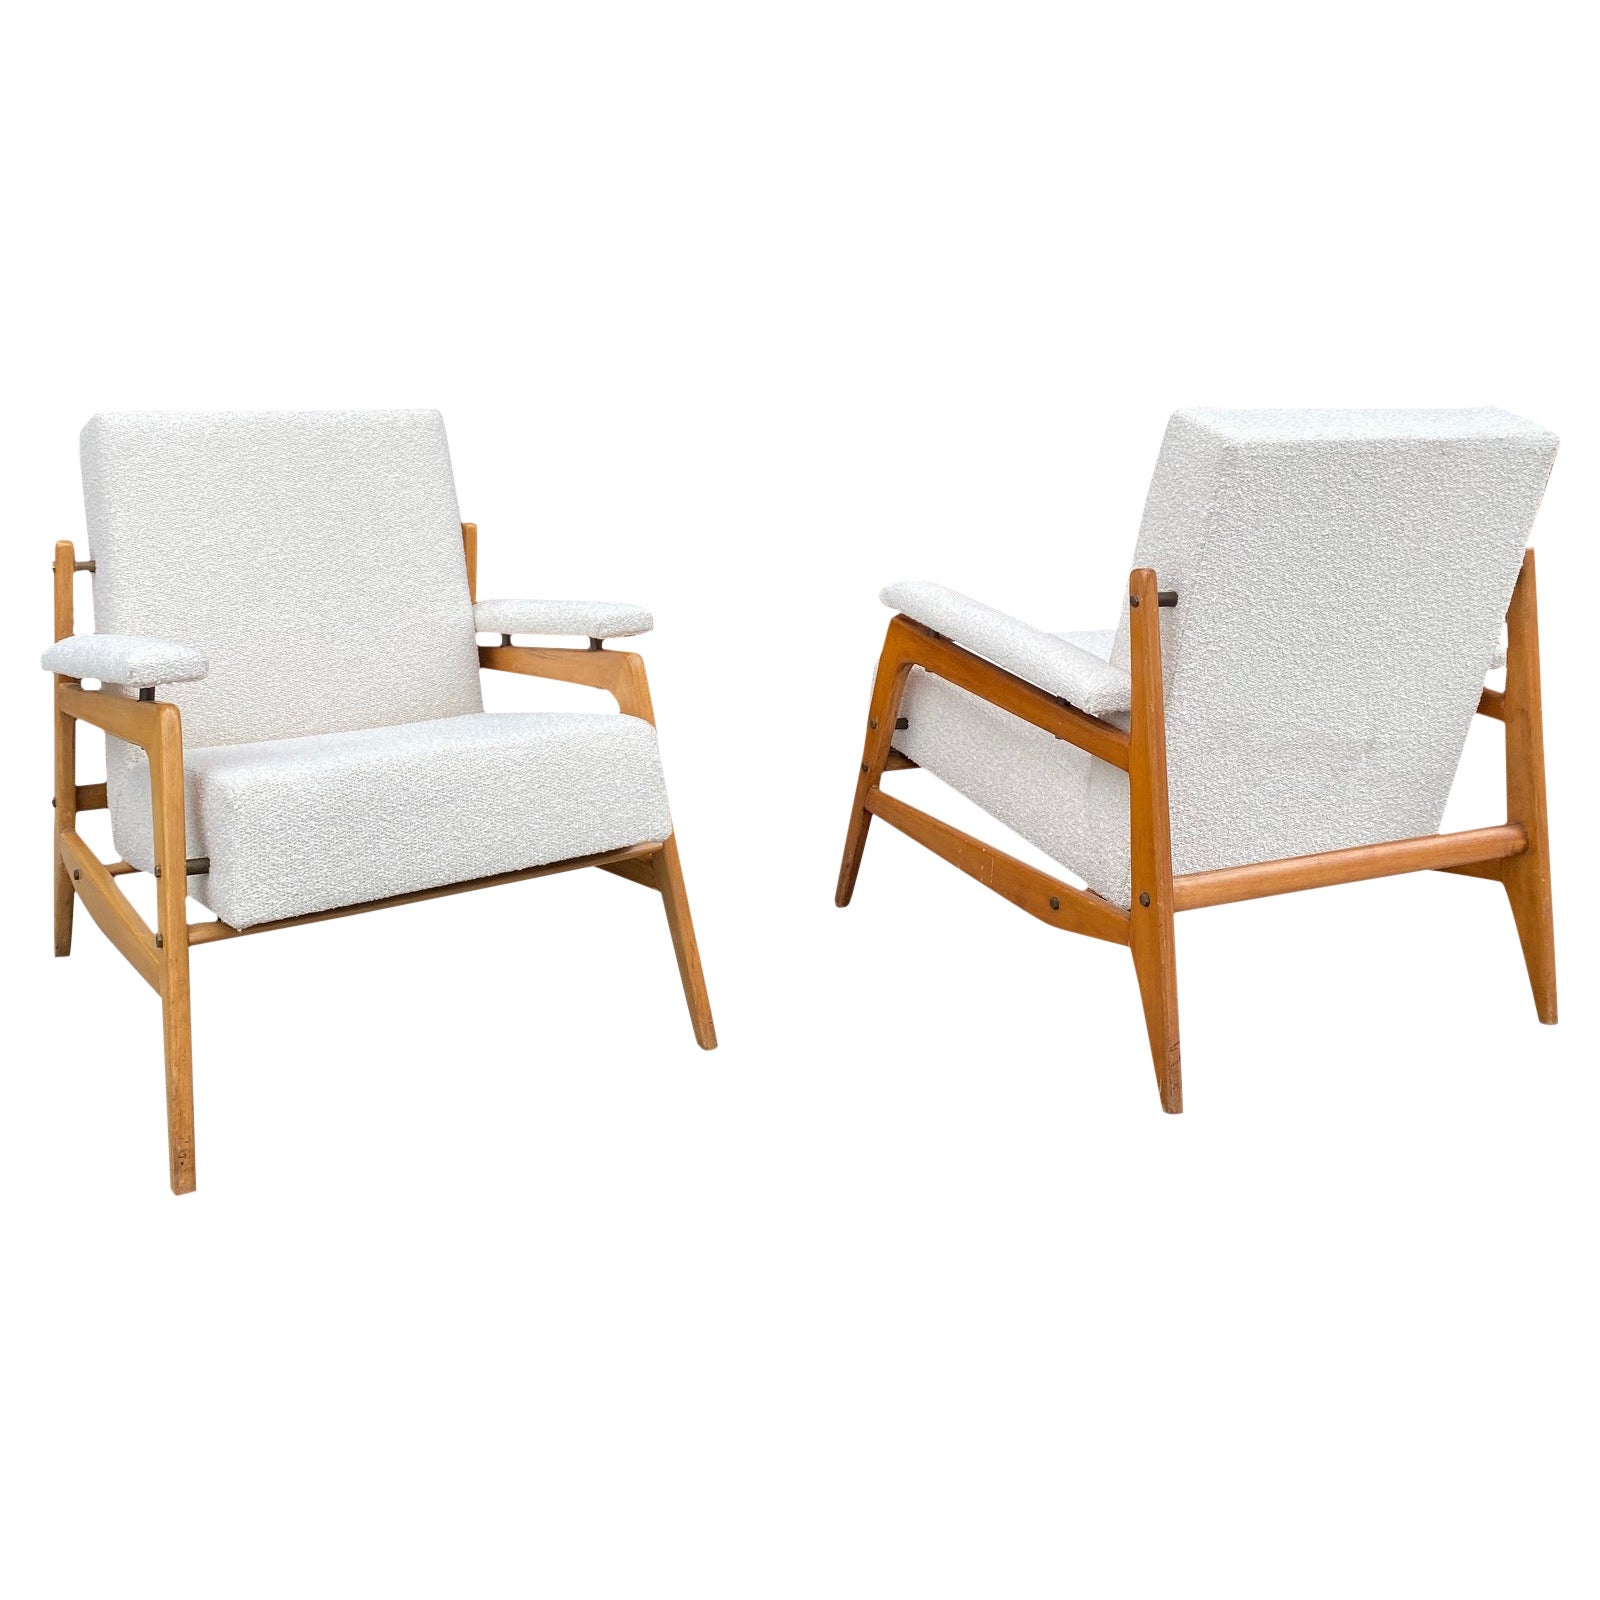 Open Frame Solid Beech with Bouclé Armchairs, Italy, 1950's For Sale